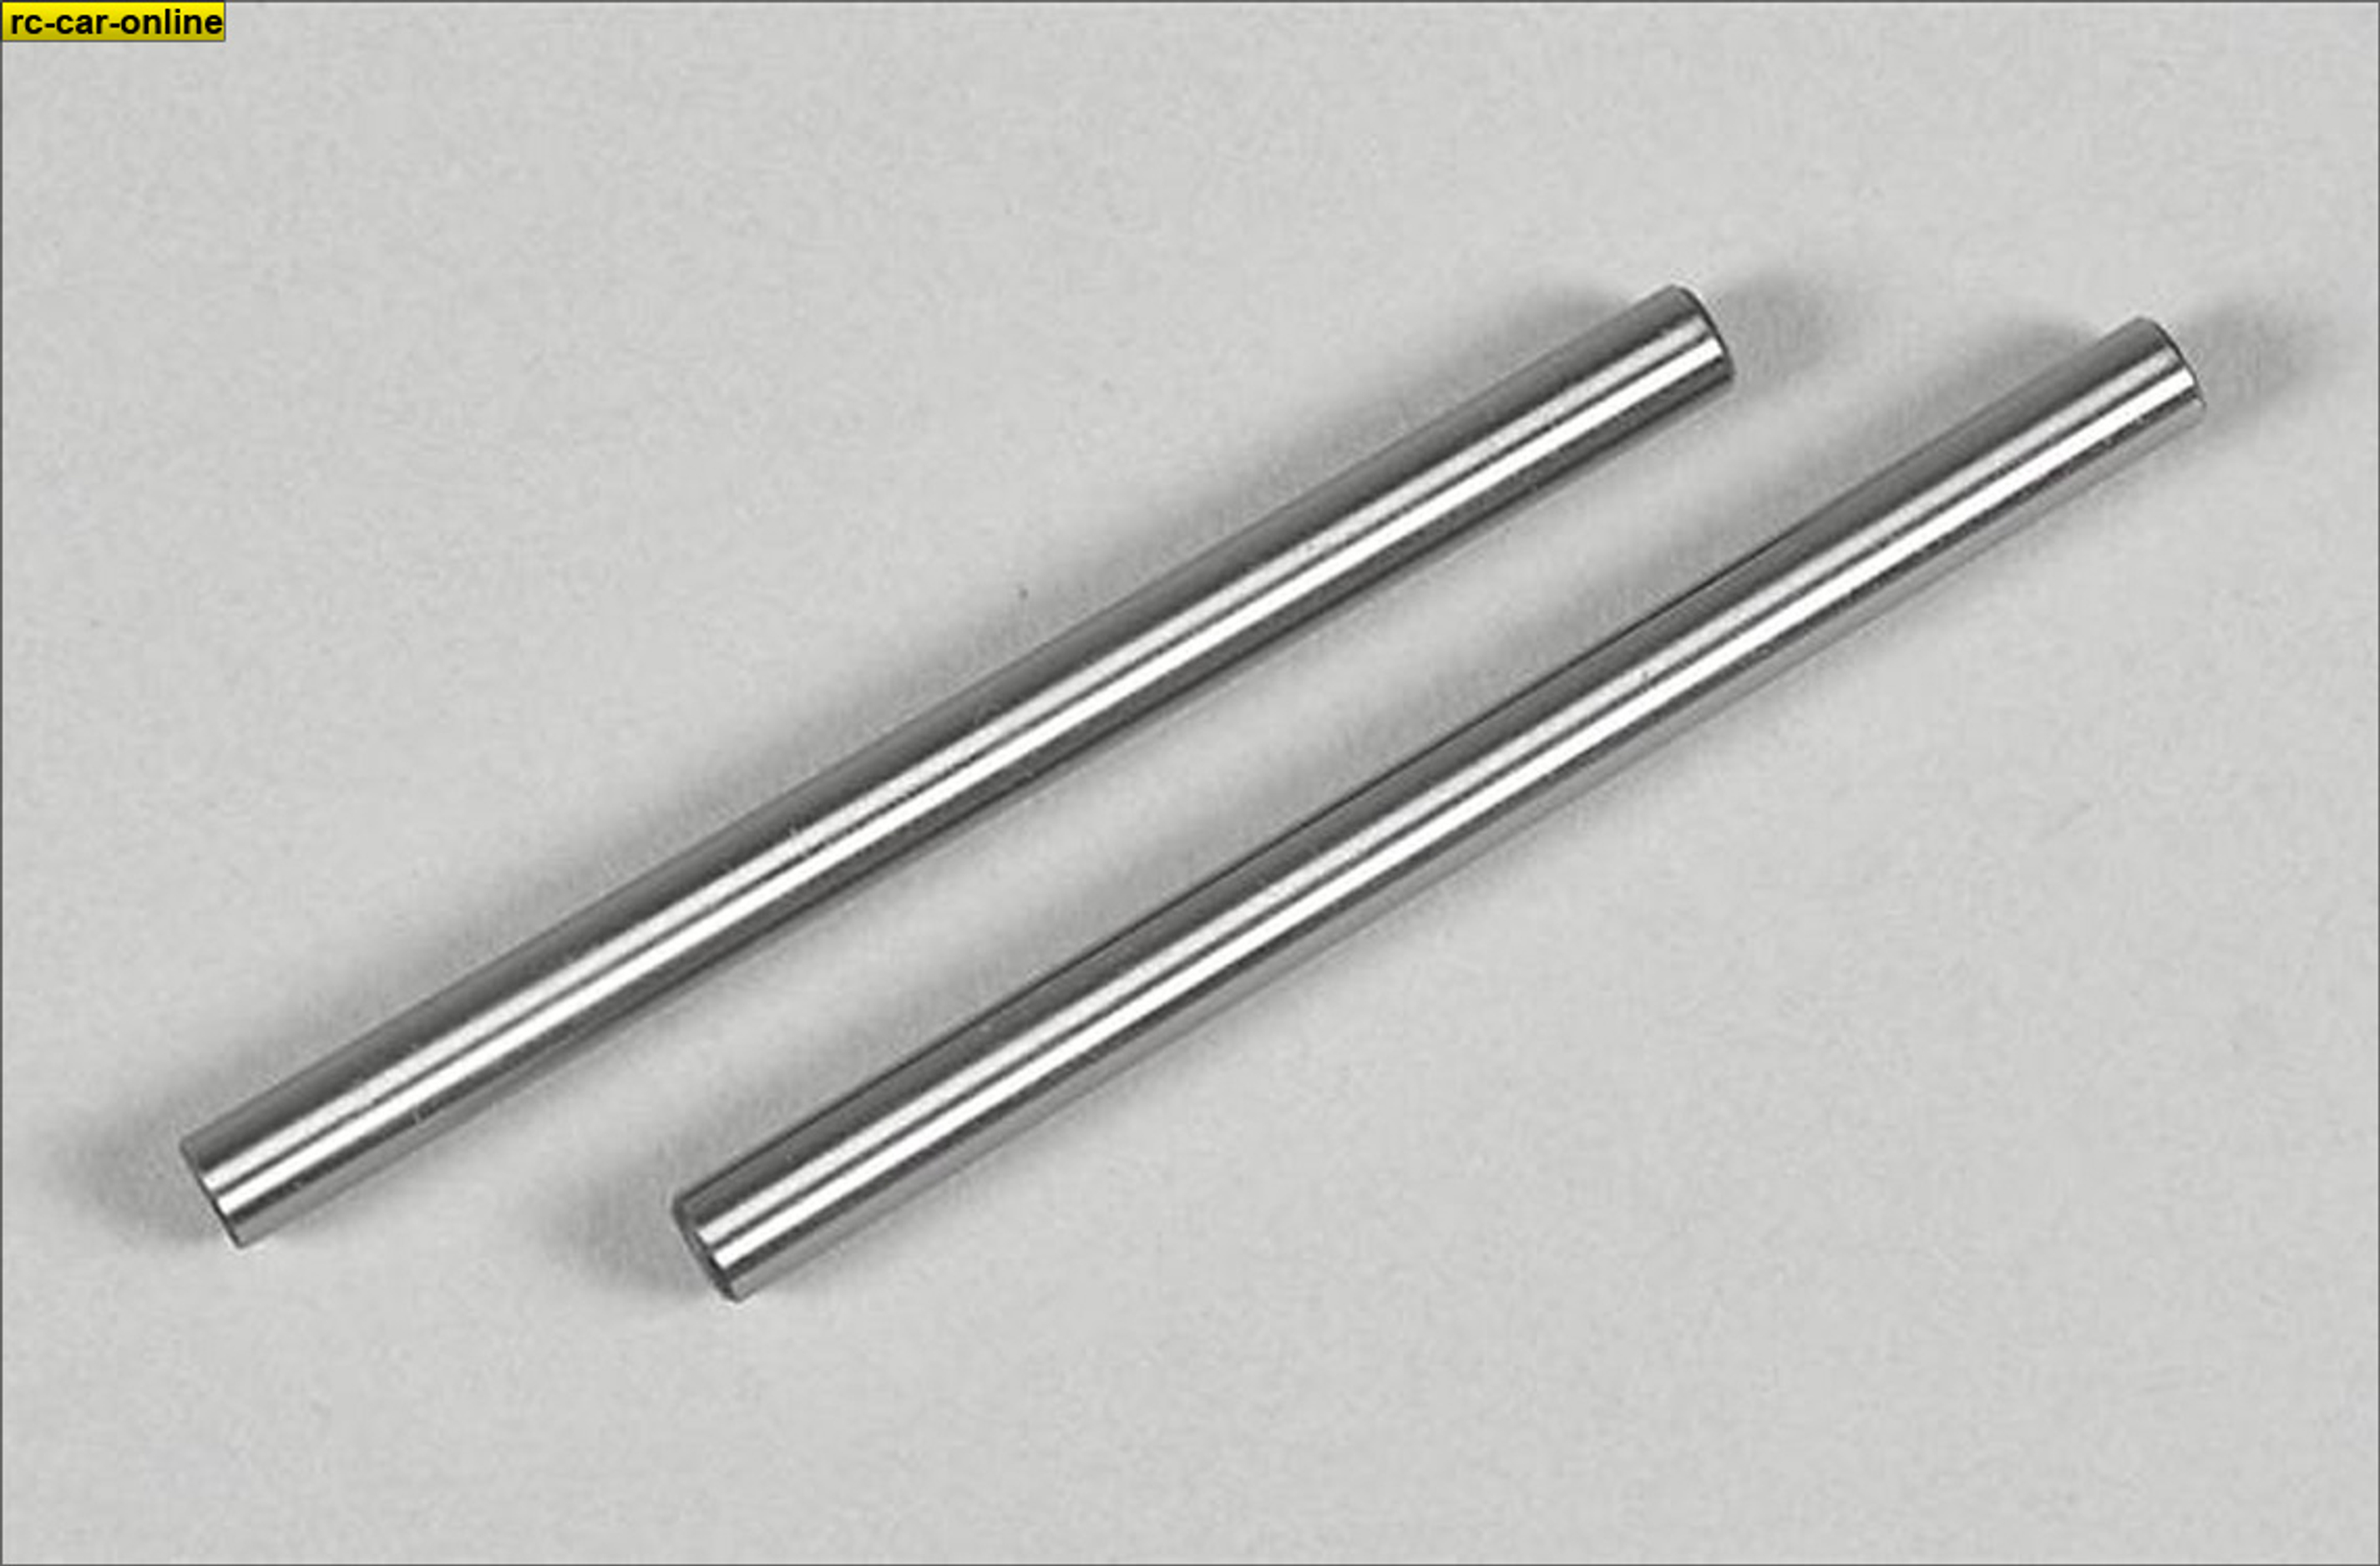 67227/01 FG Wishbone pin hardened 6x83mm for Leopard 2WD/4WD, 2 pcs.